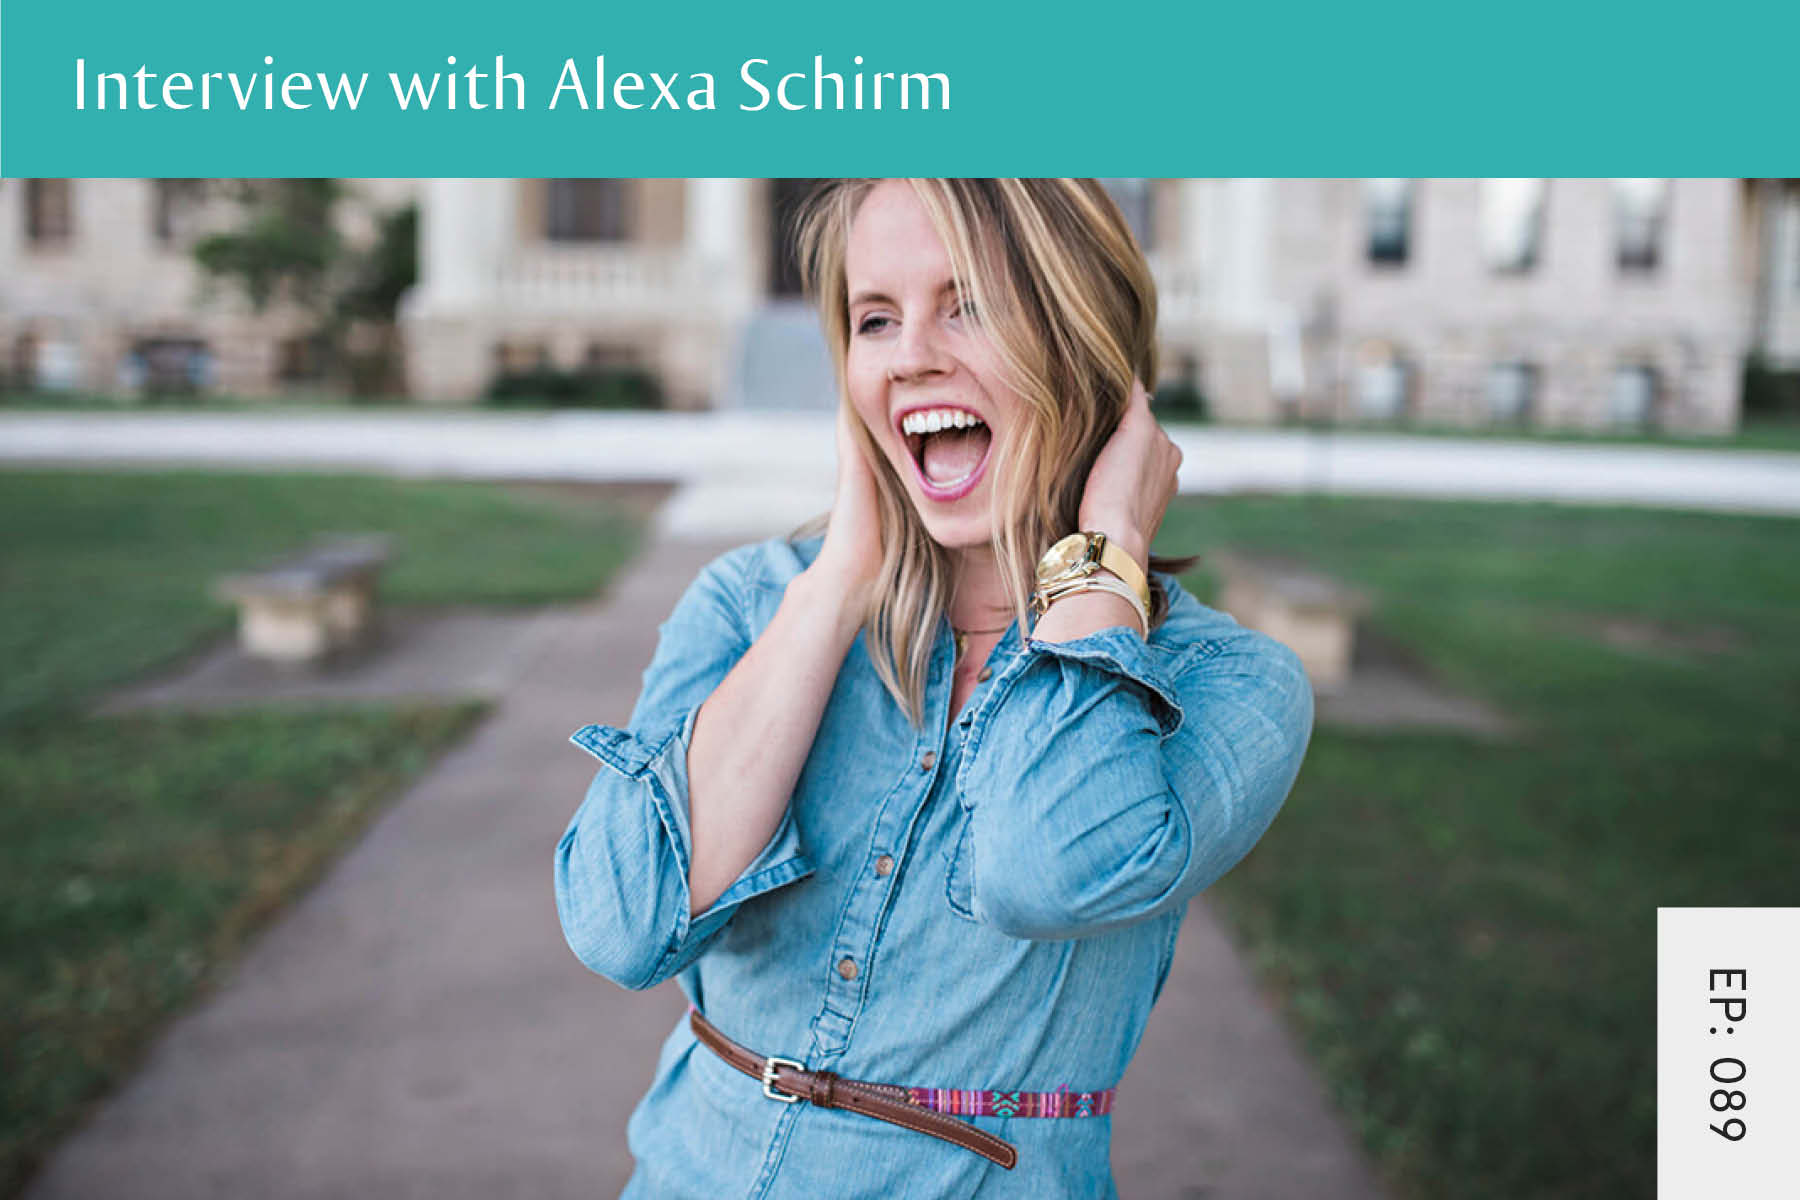 089: Interview with Alexa Schirm - Seven Health: Eating Disorder Recovery and Anti Diet Nutritionist